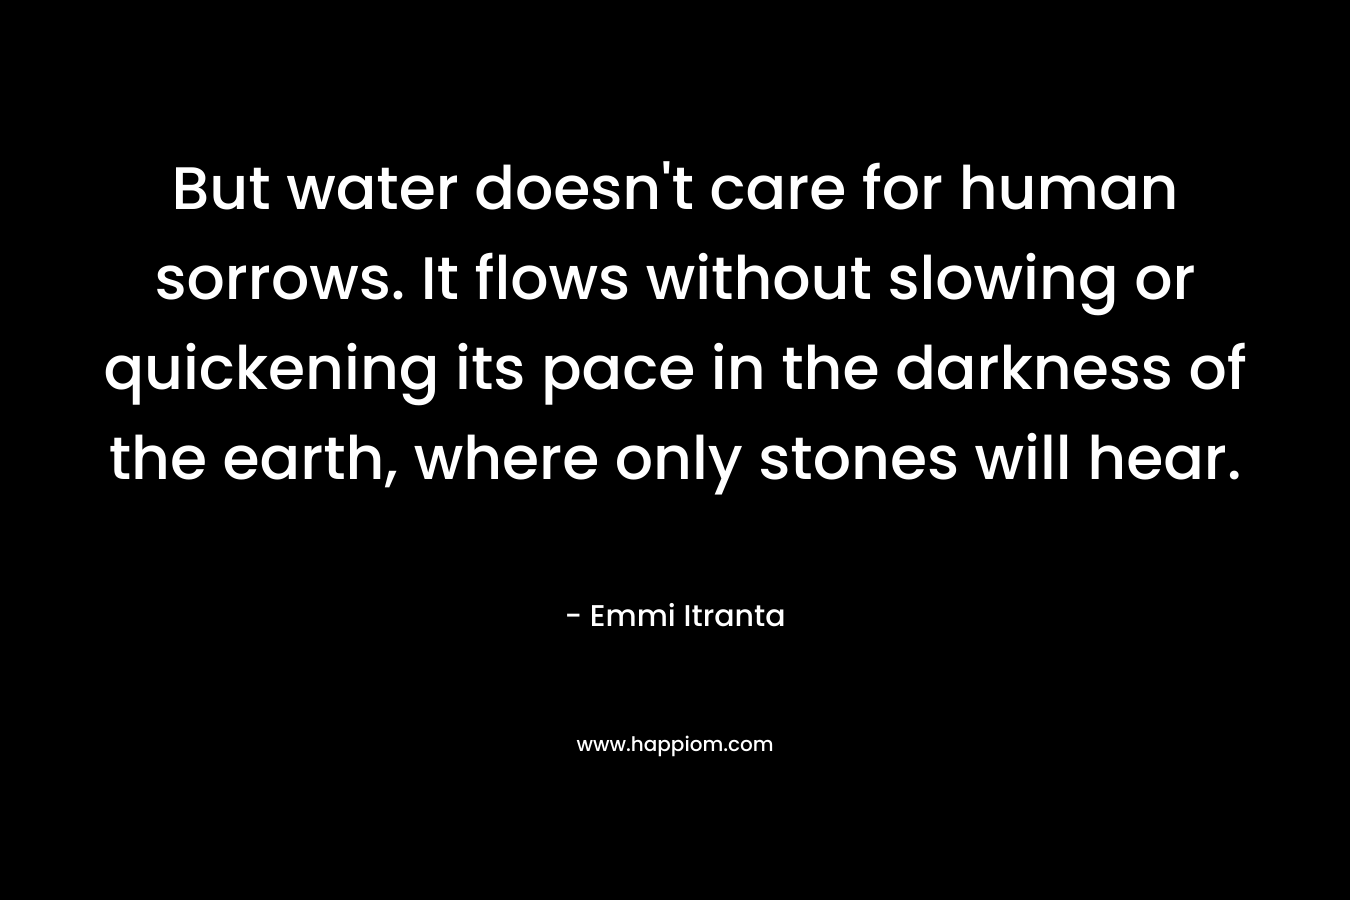 But water doesn’t care for human sorrows. It flows without slowing or quickening its pace in the darkness of the earth, where only stones will hear. – Emmi Itranta